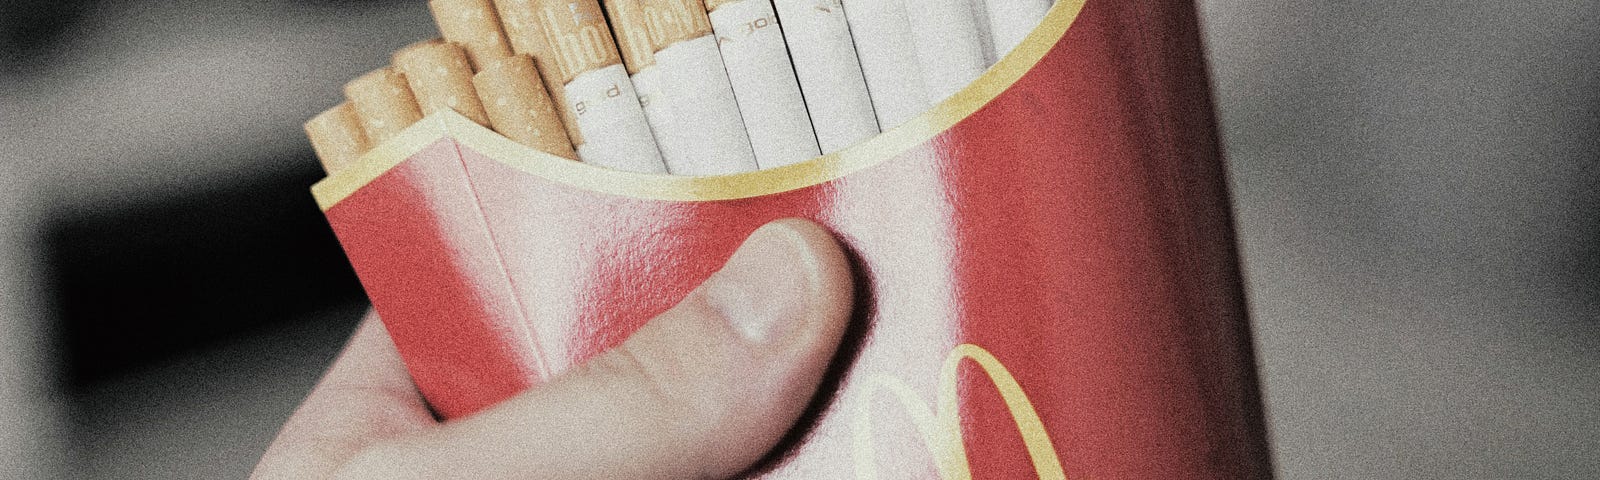 Hand holds a McDonald’s package, but the fries have been replaced with cigarettes. Not smoking can reduce stroke risk.